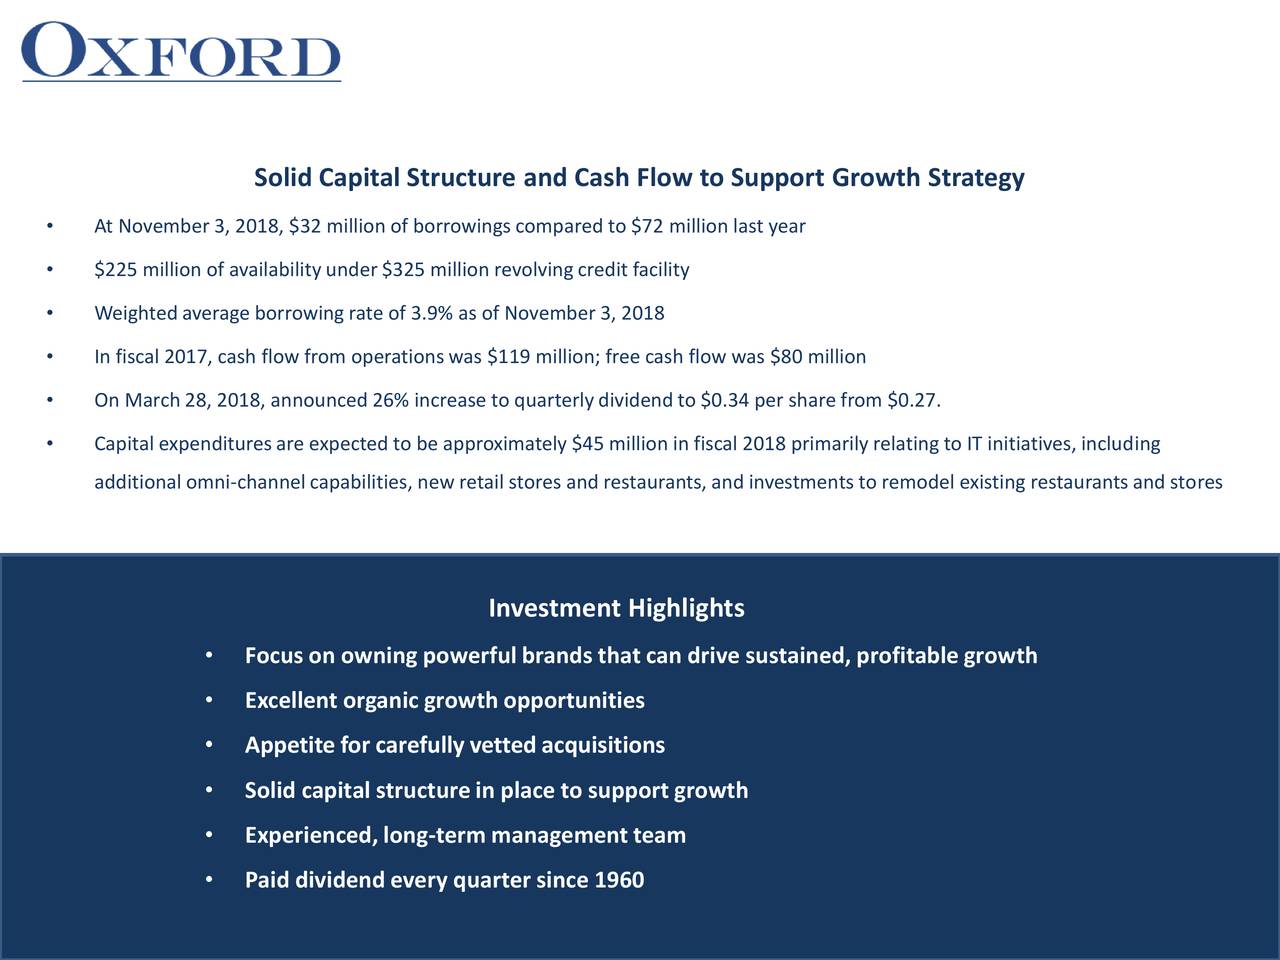 Solid Capital Structure and Cash Flow to Support Growth Strategy